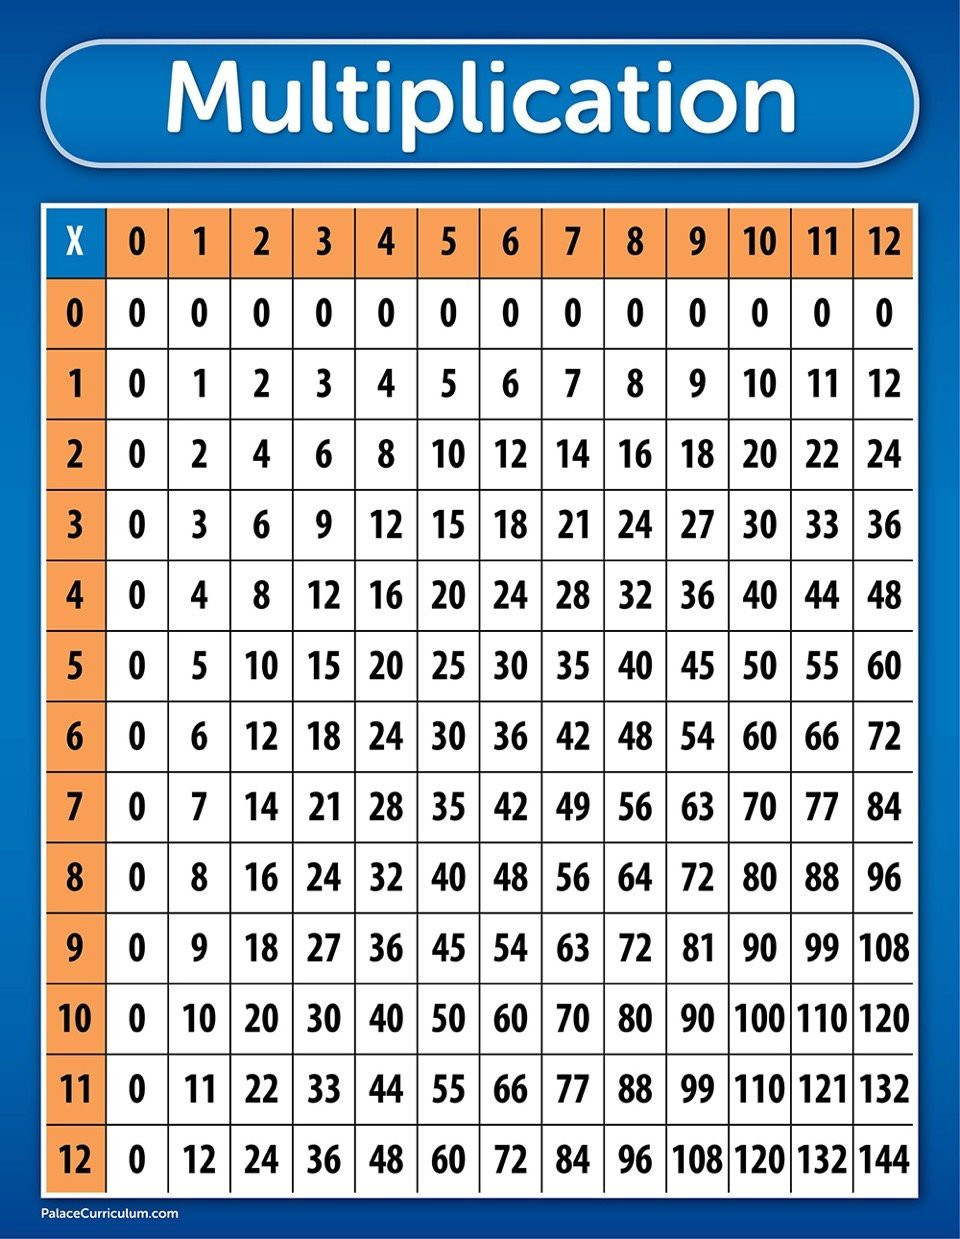 Multiplication Table For Kids
 a new style of multiplication tables – It s Your Turn